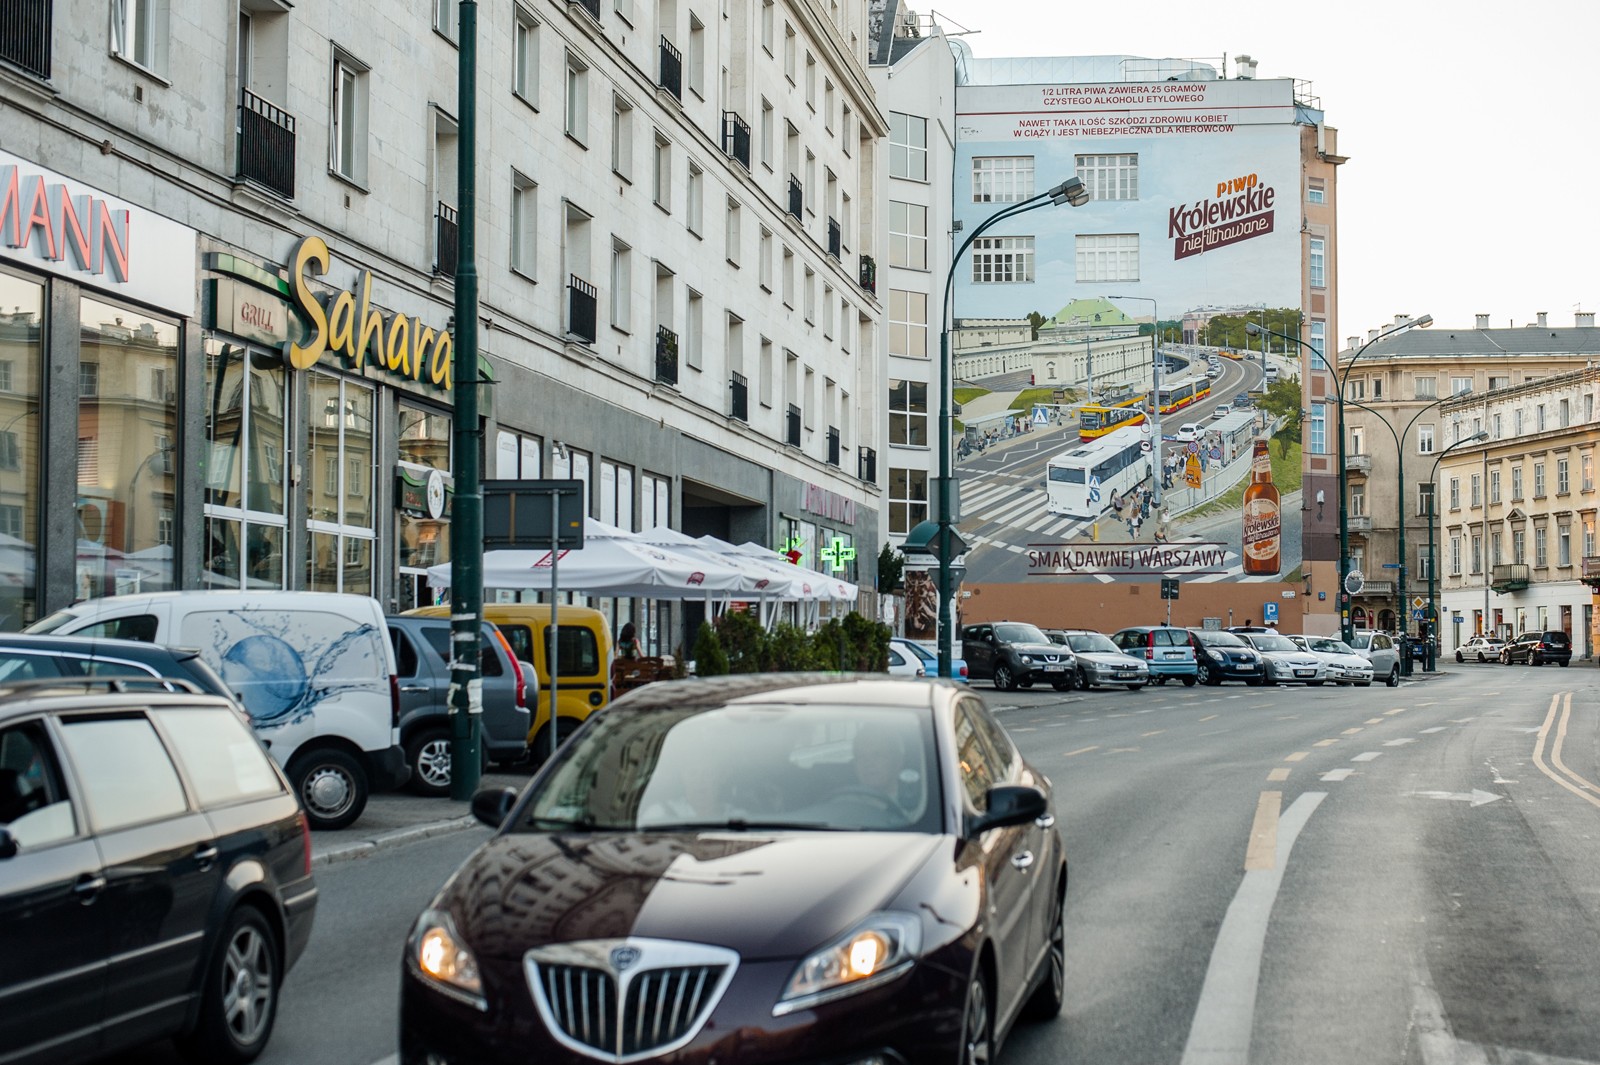 A view on Krucza street in Warsaw with an advertising mural of Krolewskie unfiltered beer in the background | Krolewskie unfiltered | Portfolio